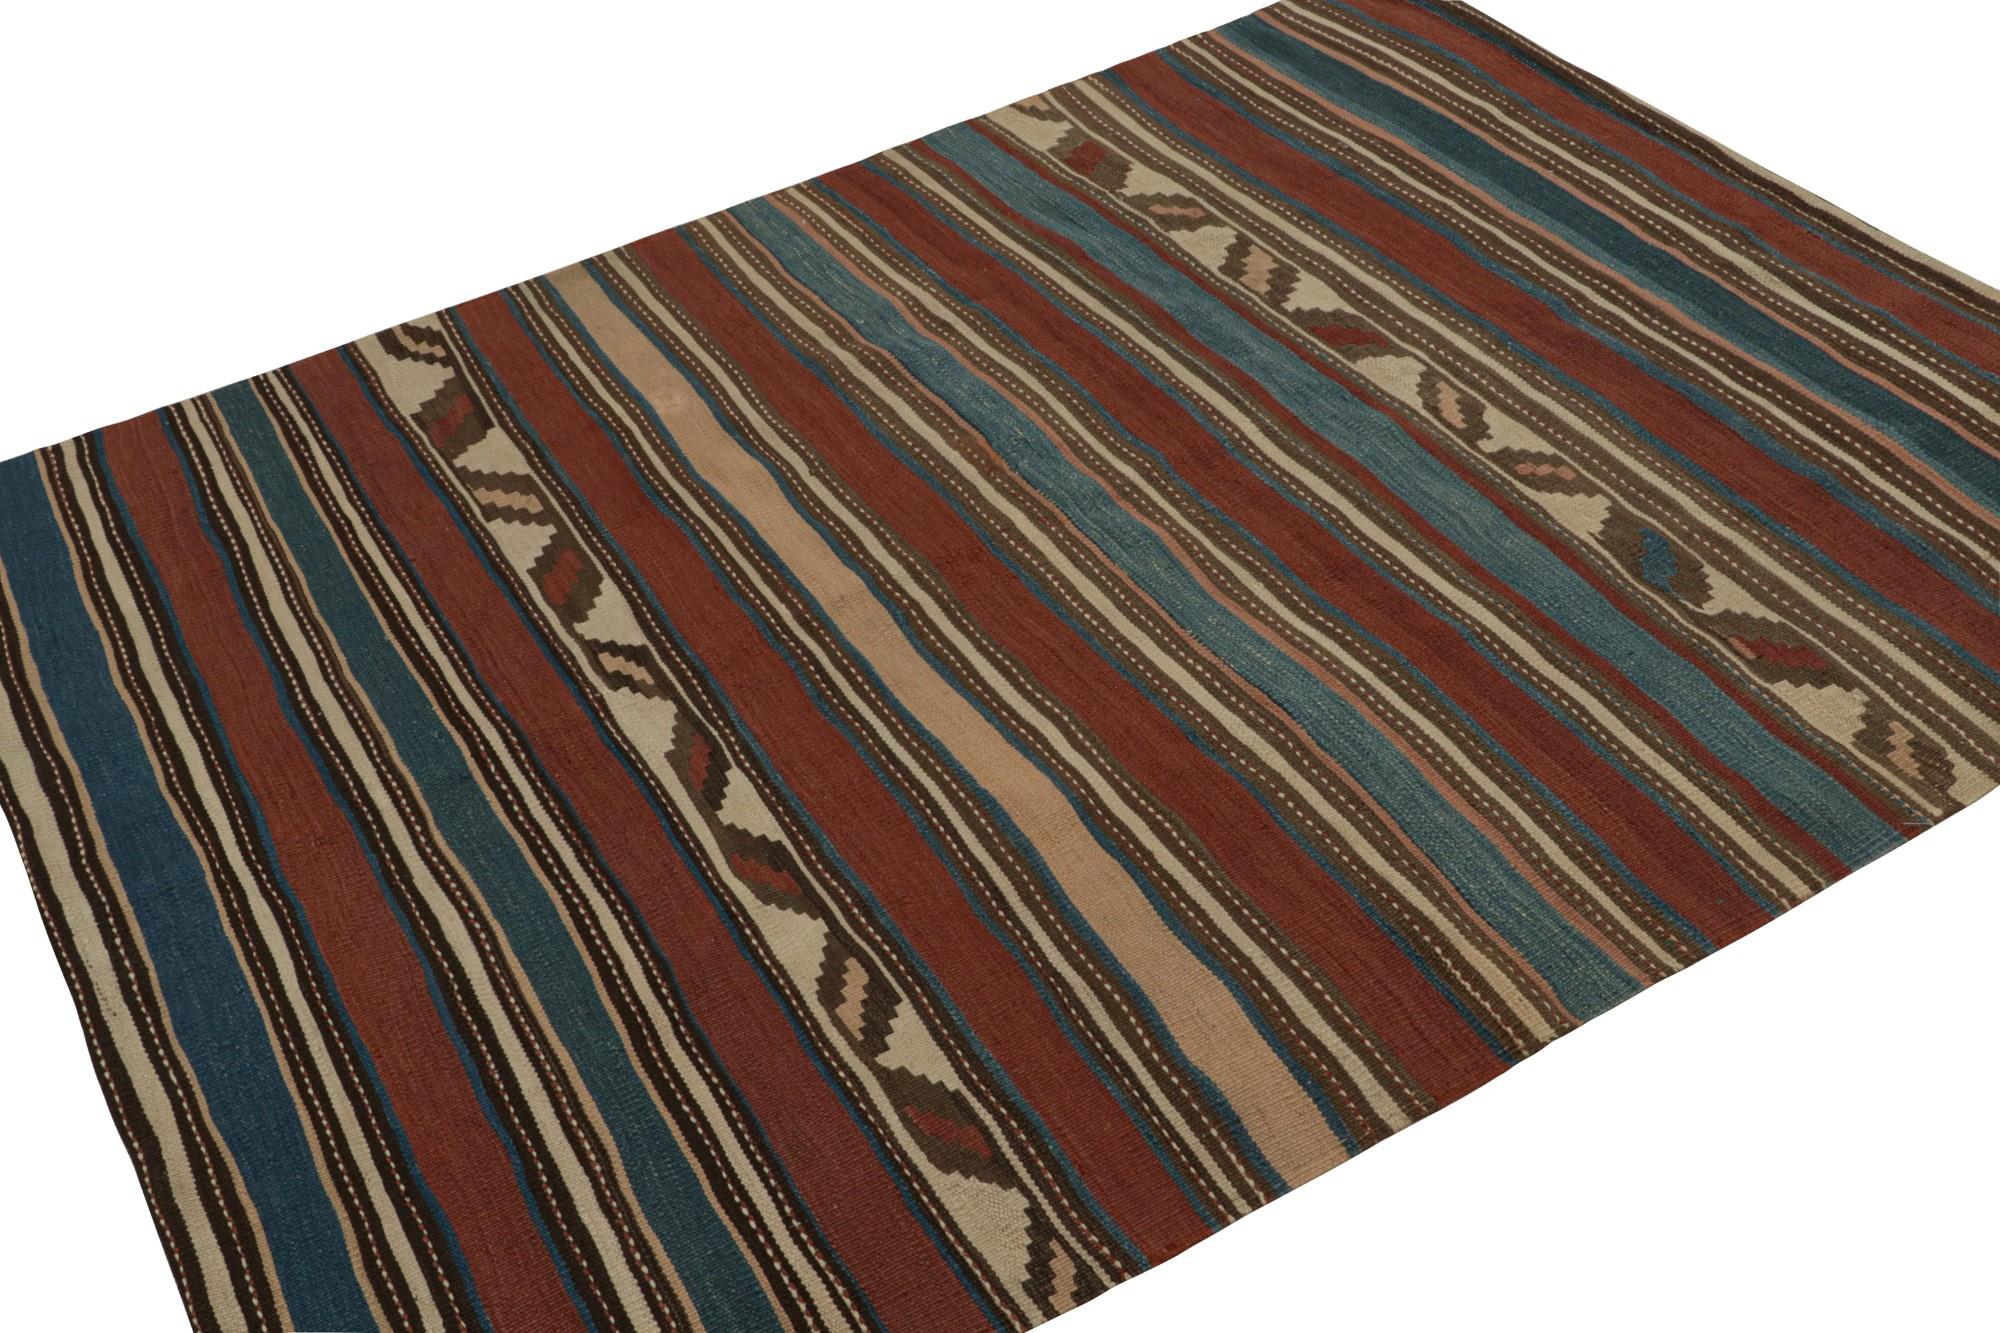 Hand knotted in wool, this 5x6 Afghan tribal kilim represents a new line of tribal carpets in the Modern Classics Collection by Rug & Kilim. Each piece represents the work of women weavers in Afghanistan, preserving the rich tradition of their